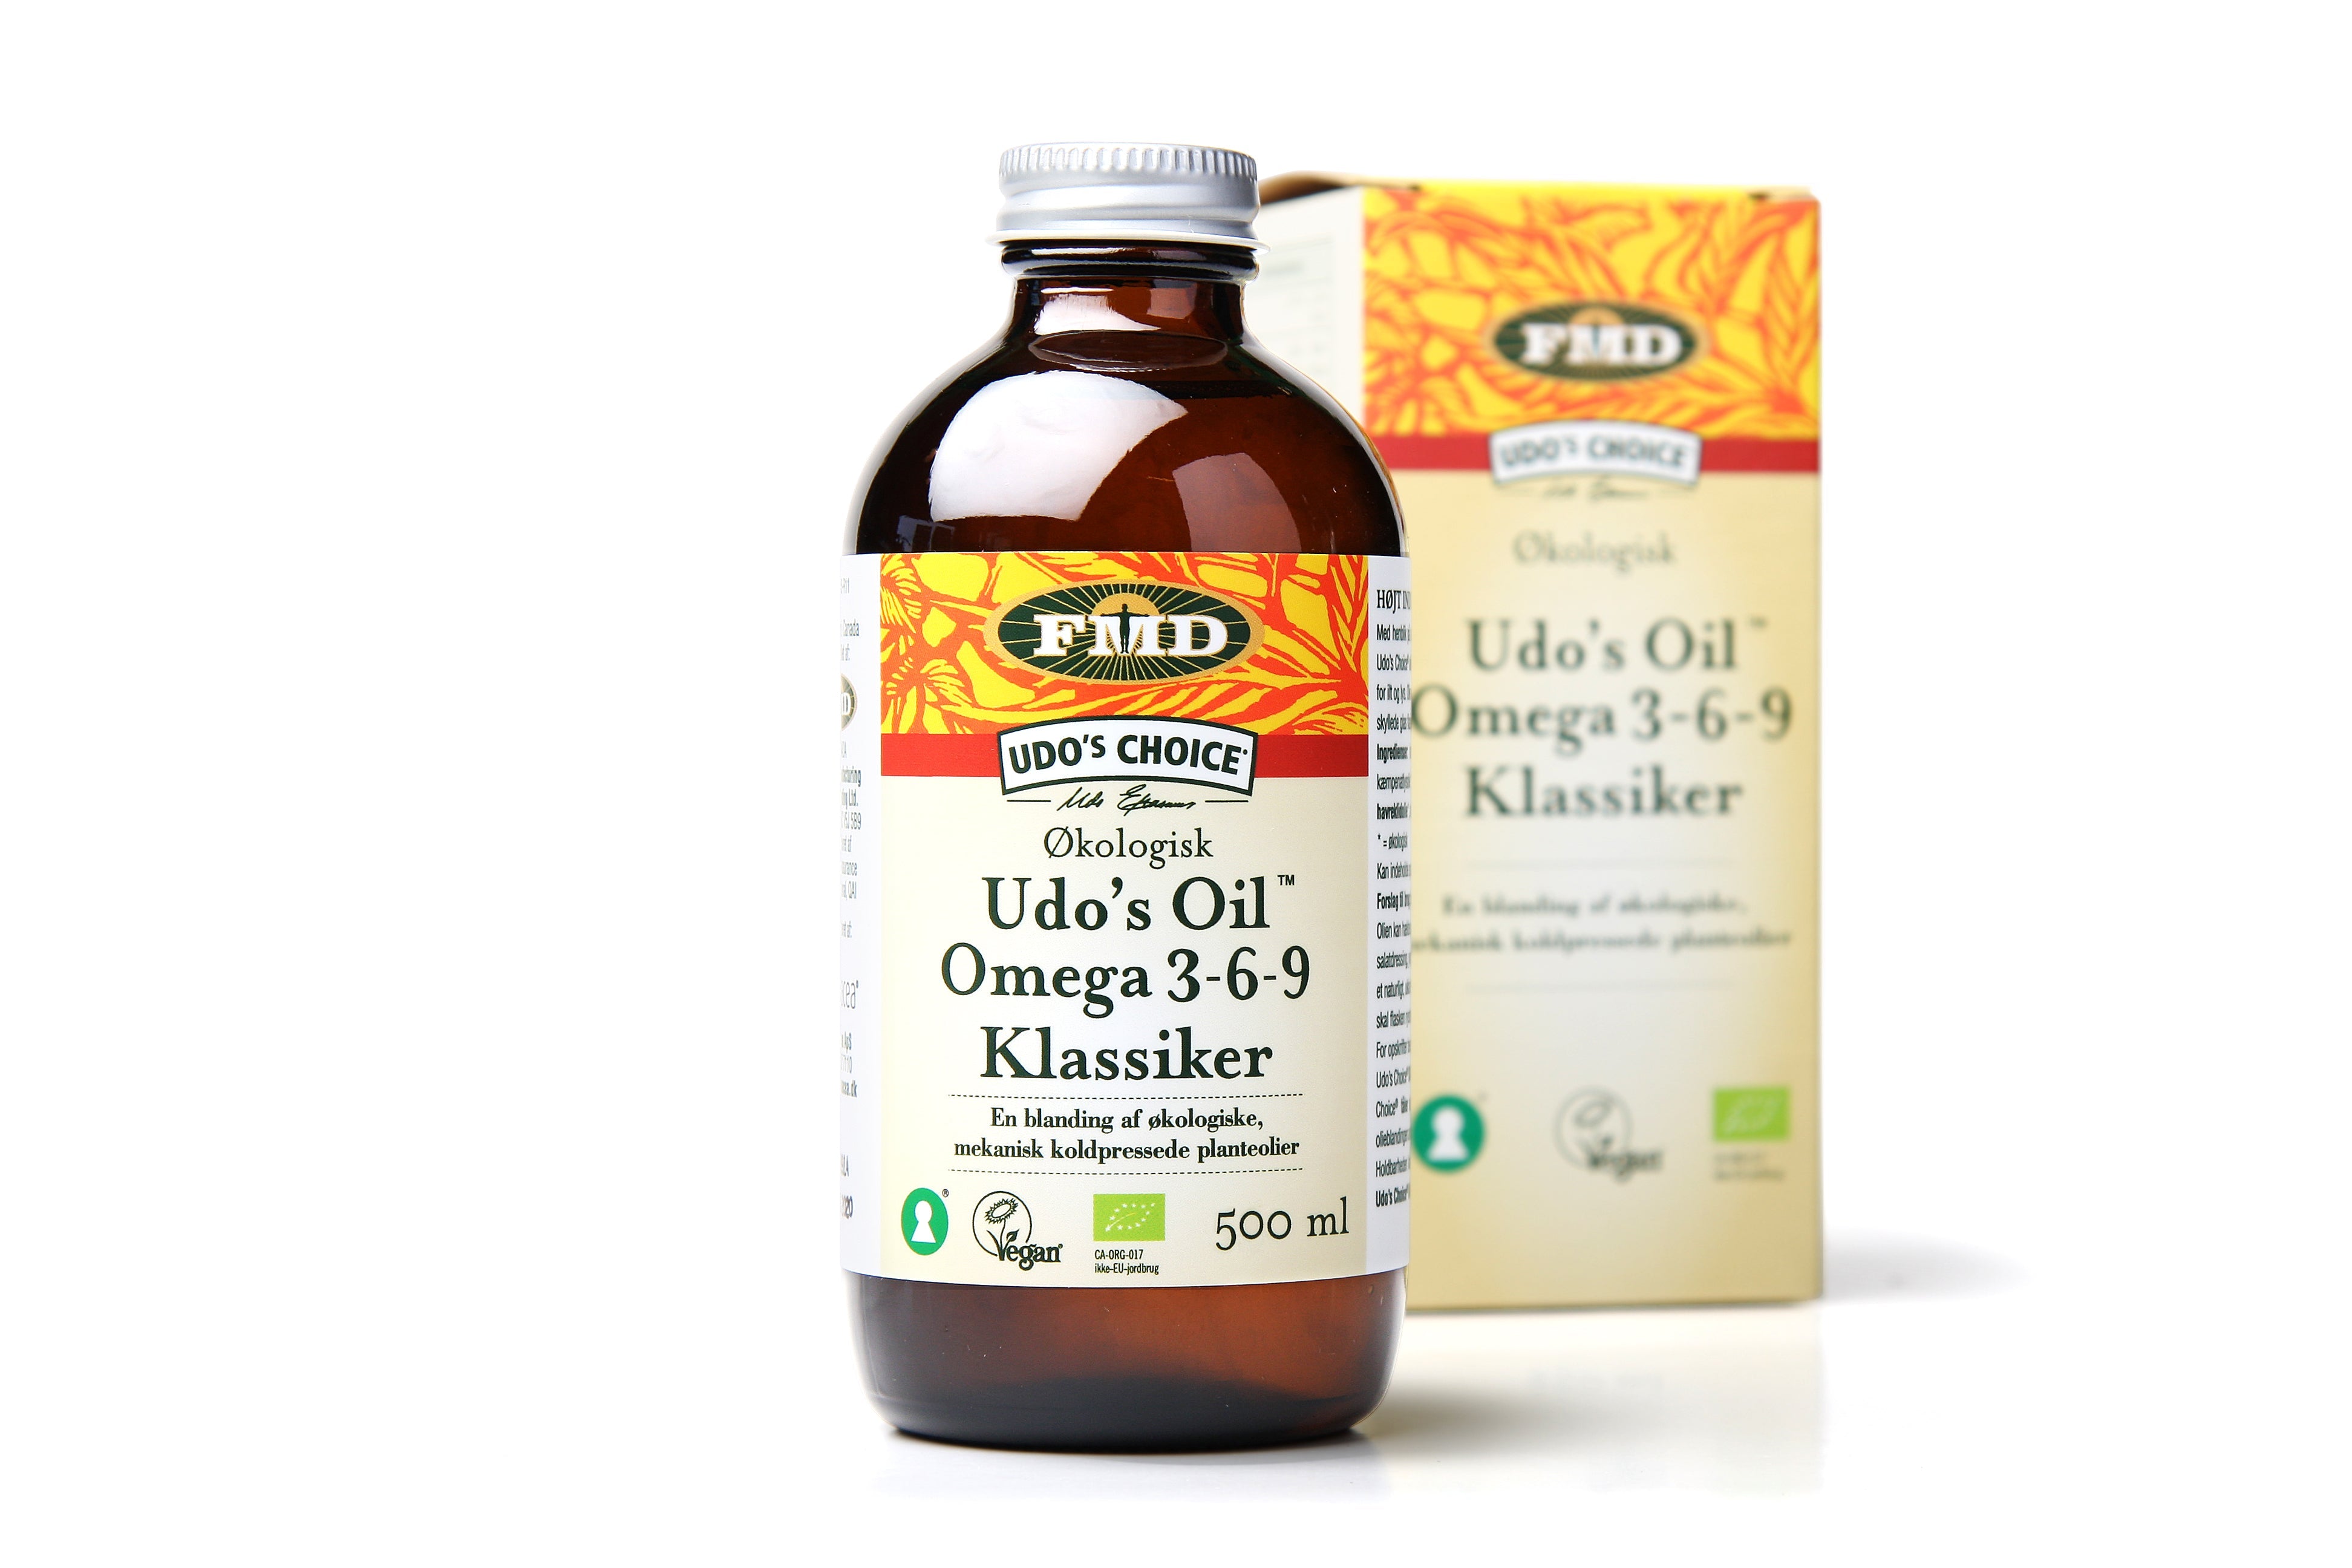 Udos Choise - Udo's Choice Ultimate Oil Blend - 500 Ml